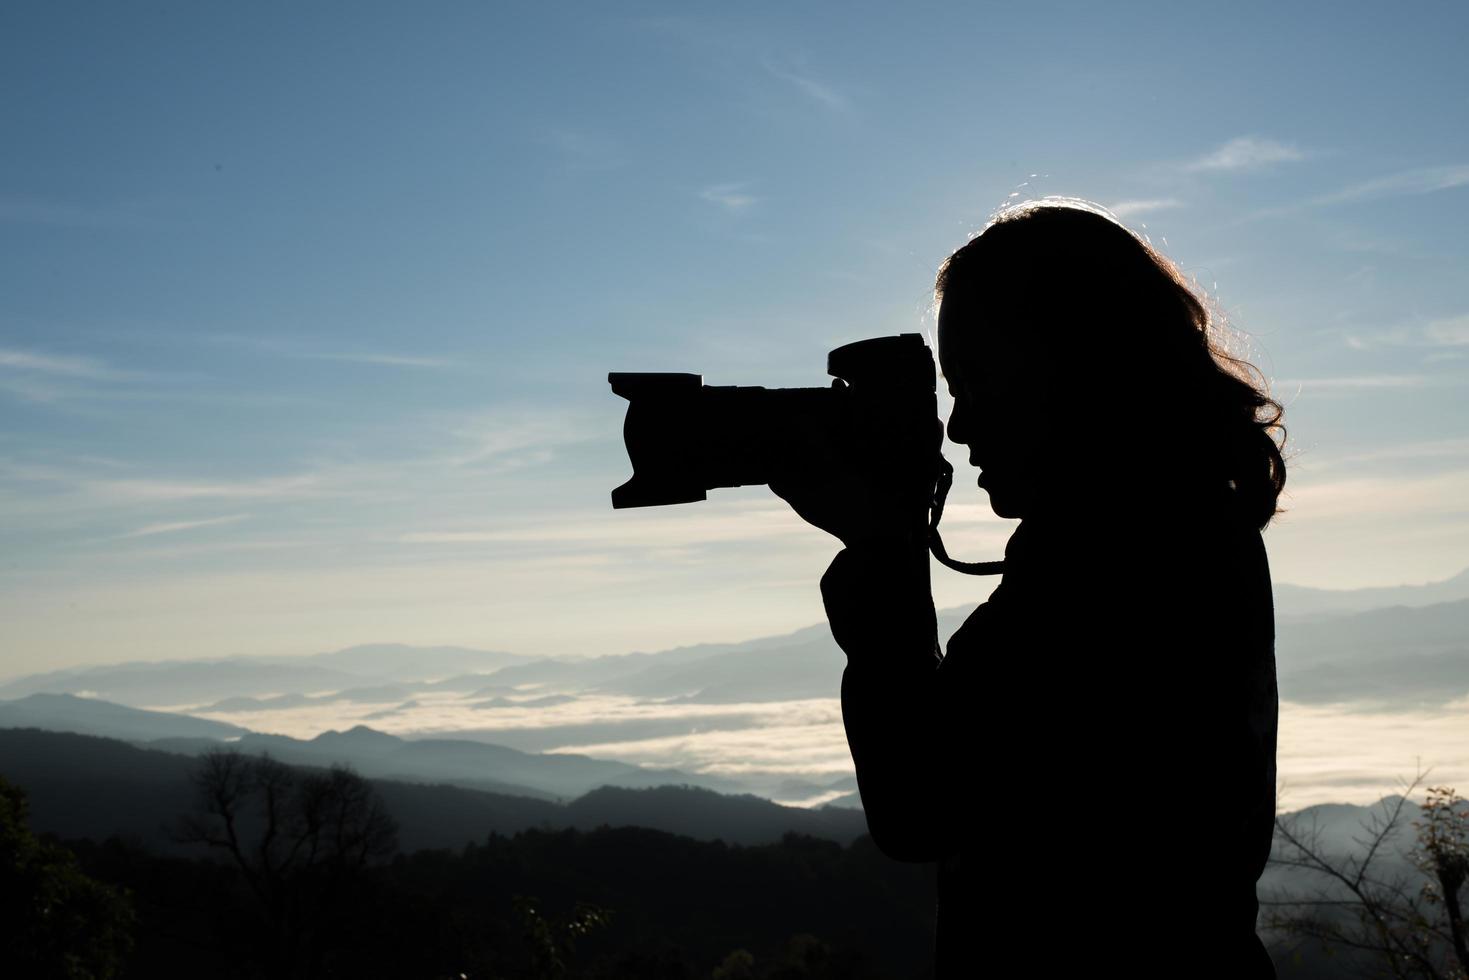 Silhouette of young photographer holding a camera with mountain landscape photo